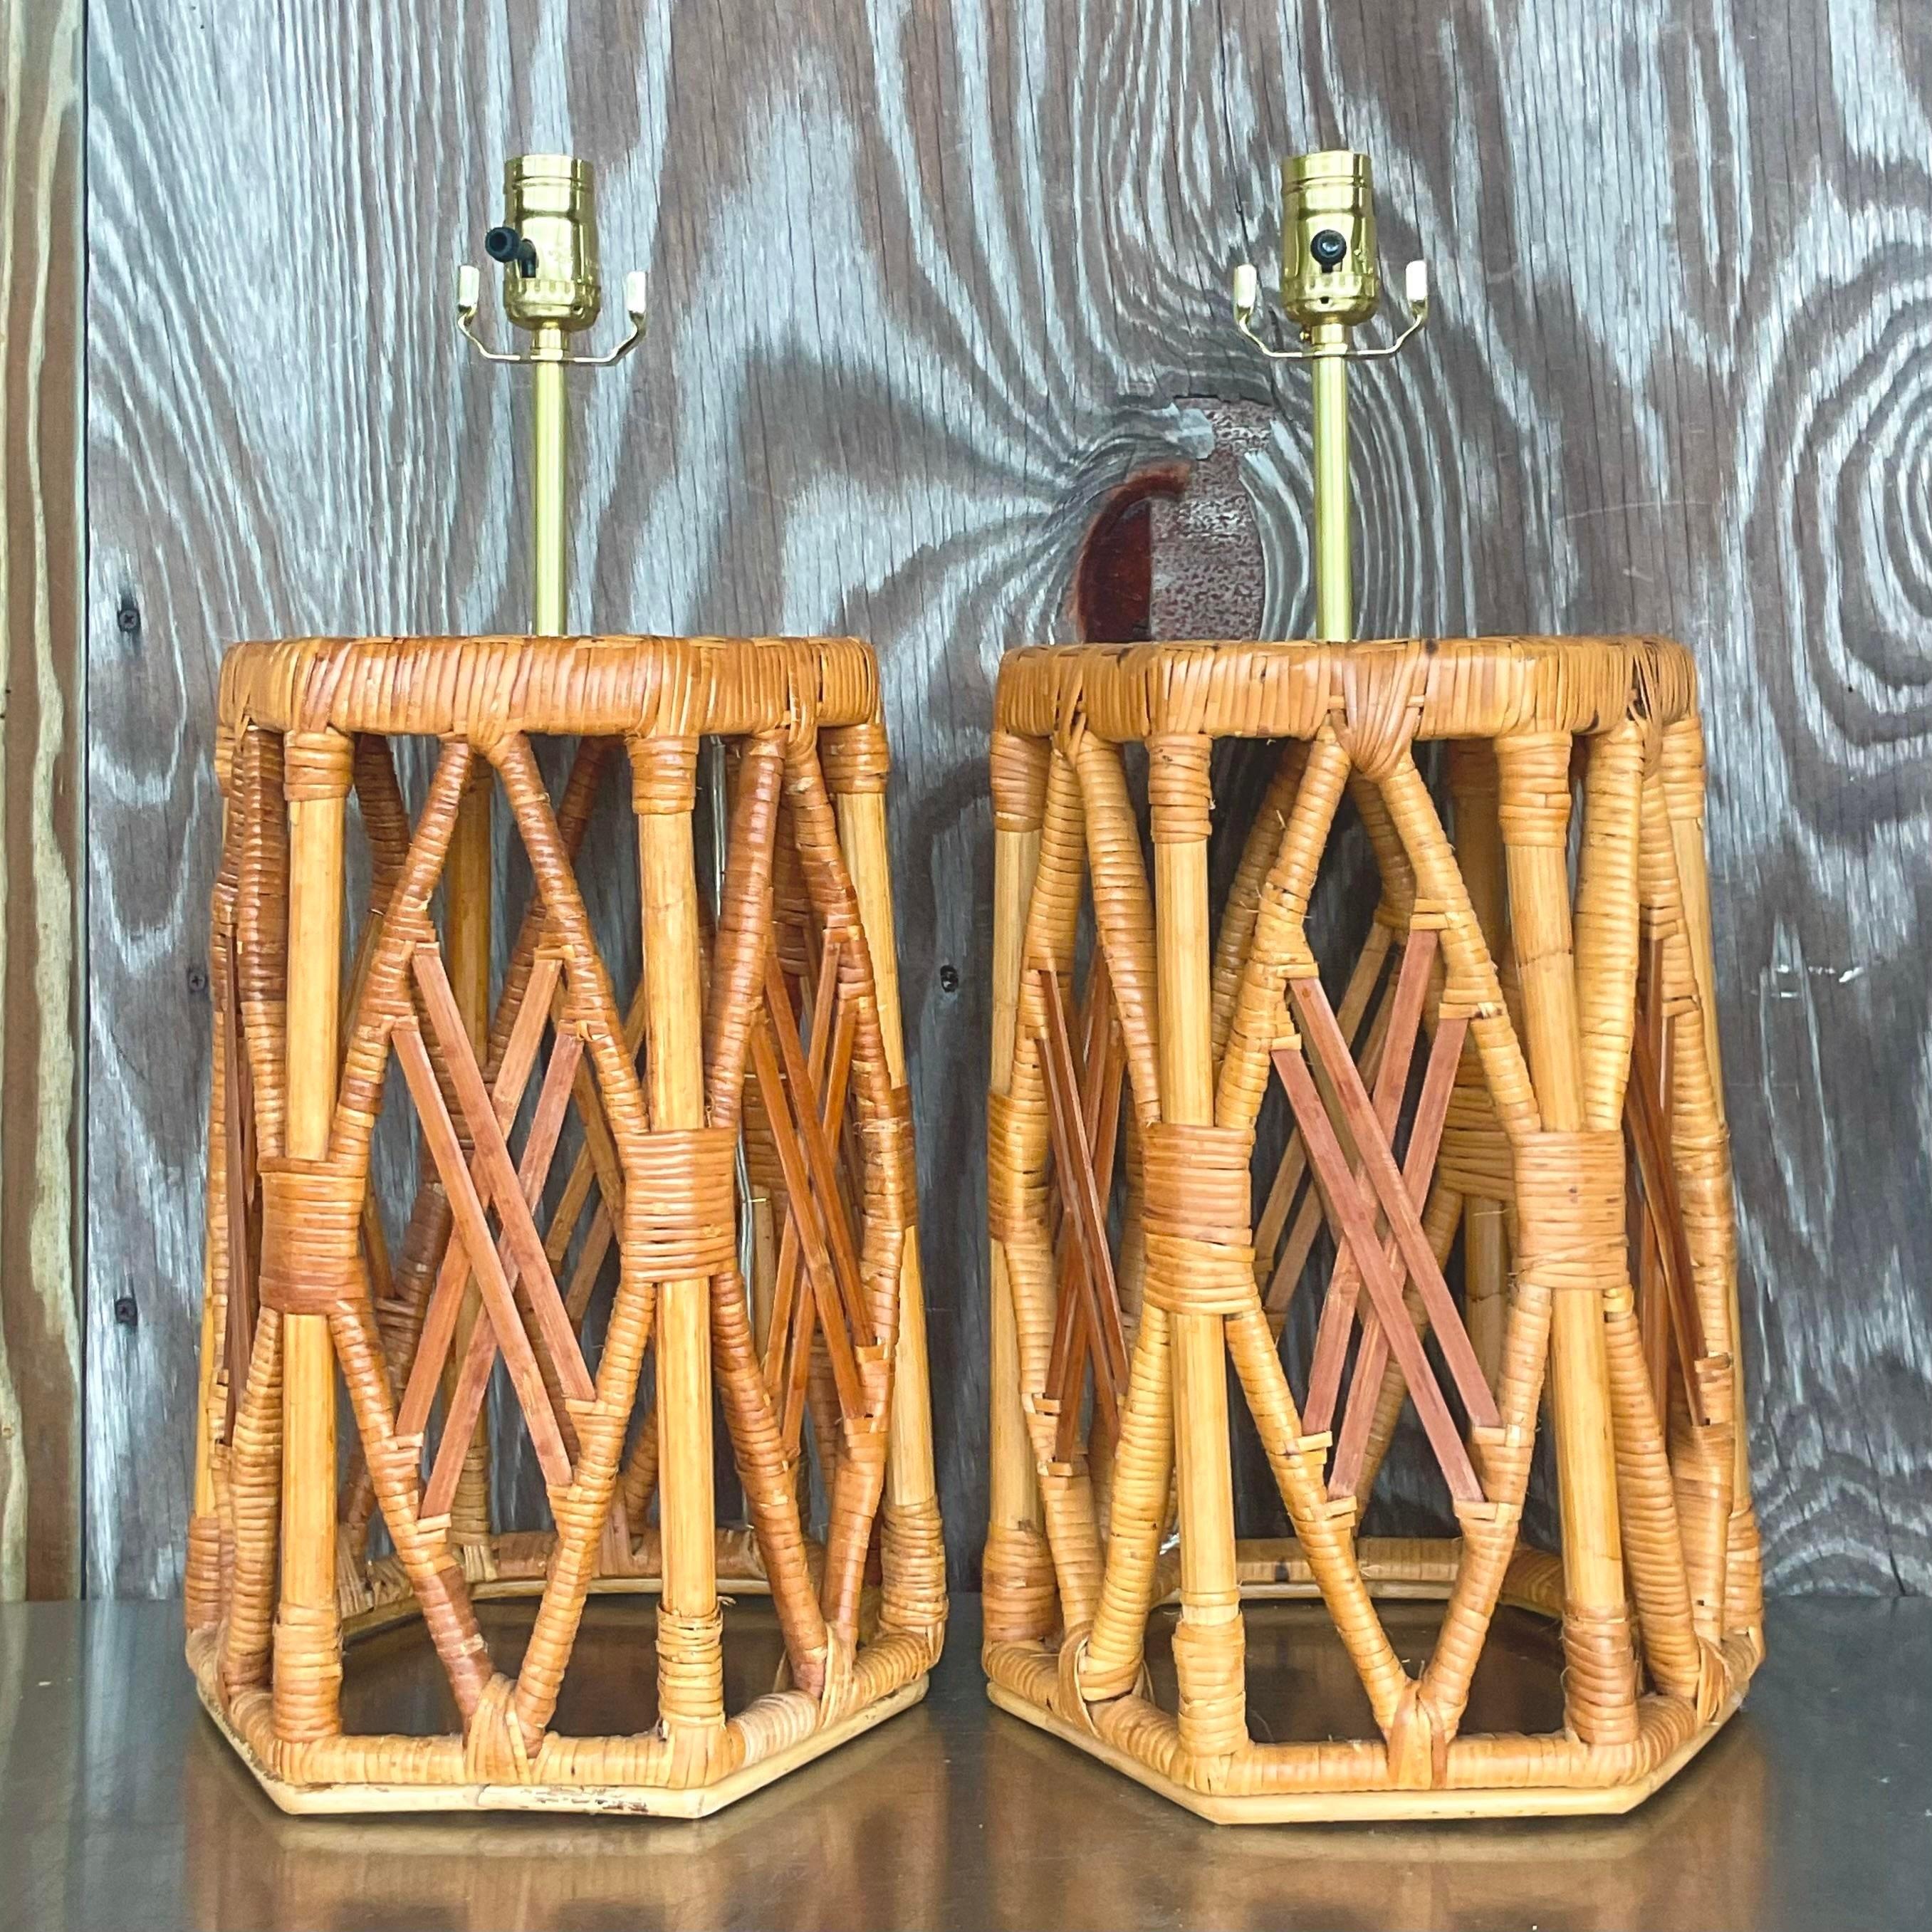 A fabulous pair of vintage Coastal table lamps. A chic wrapped rattan open frame with no interior hardware. Fully restored with all new wiring and hardware. Two sets available on my  page. Acquired from a Palm Beach estate.